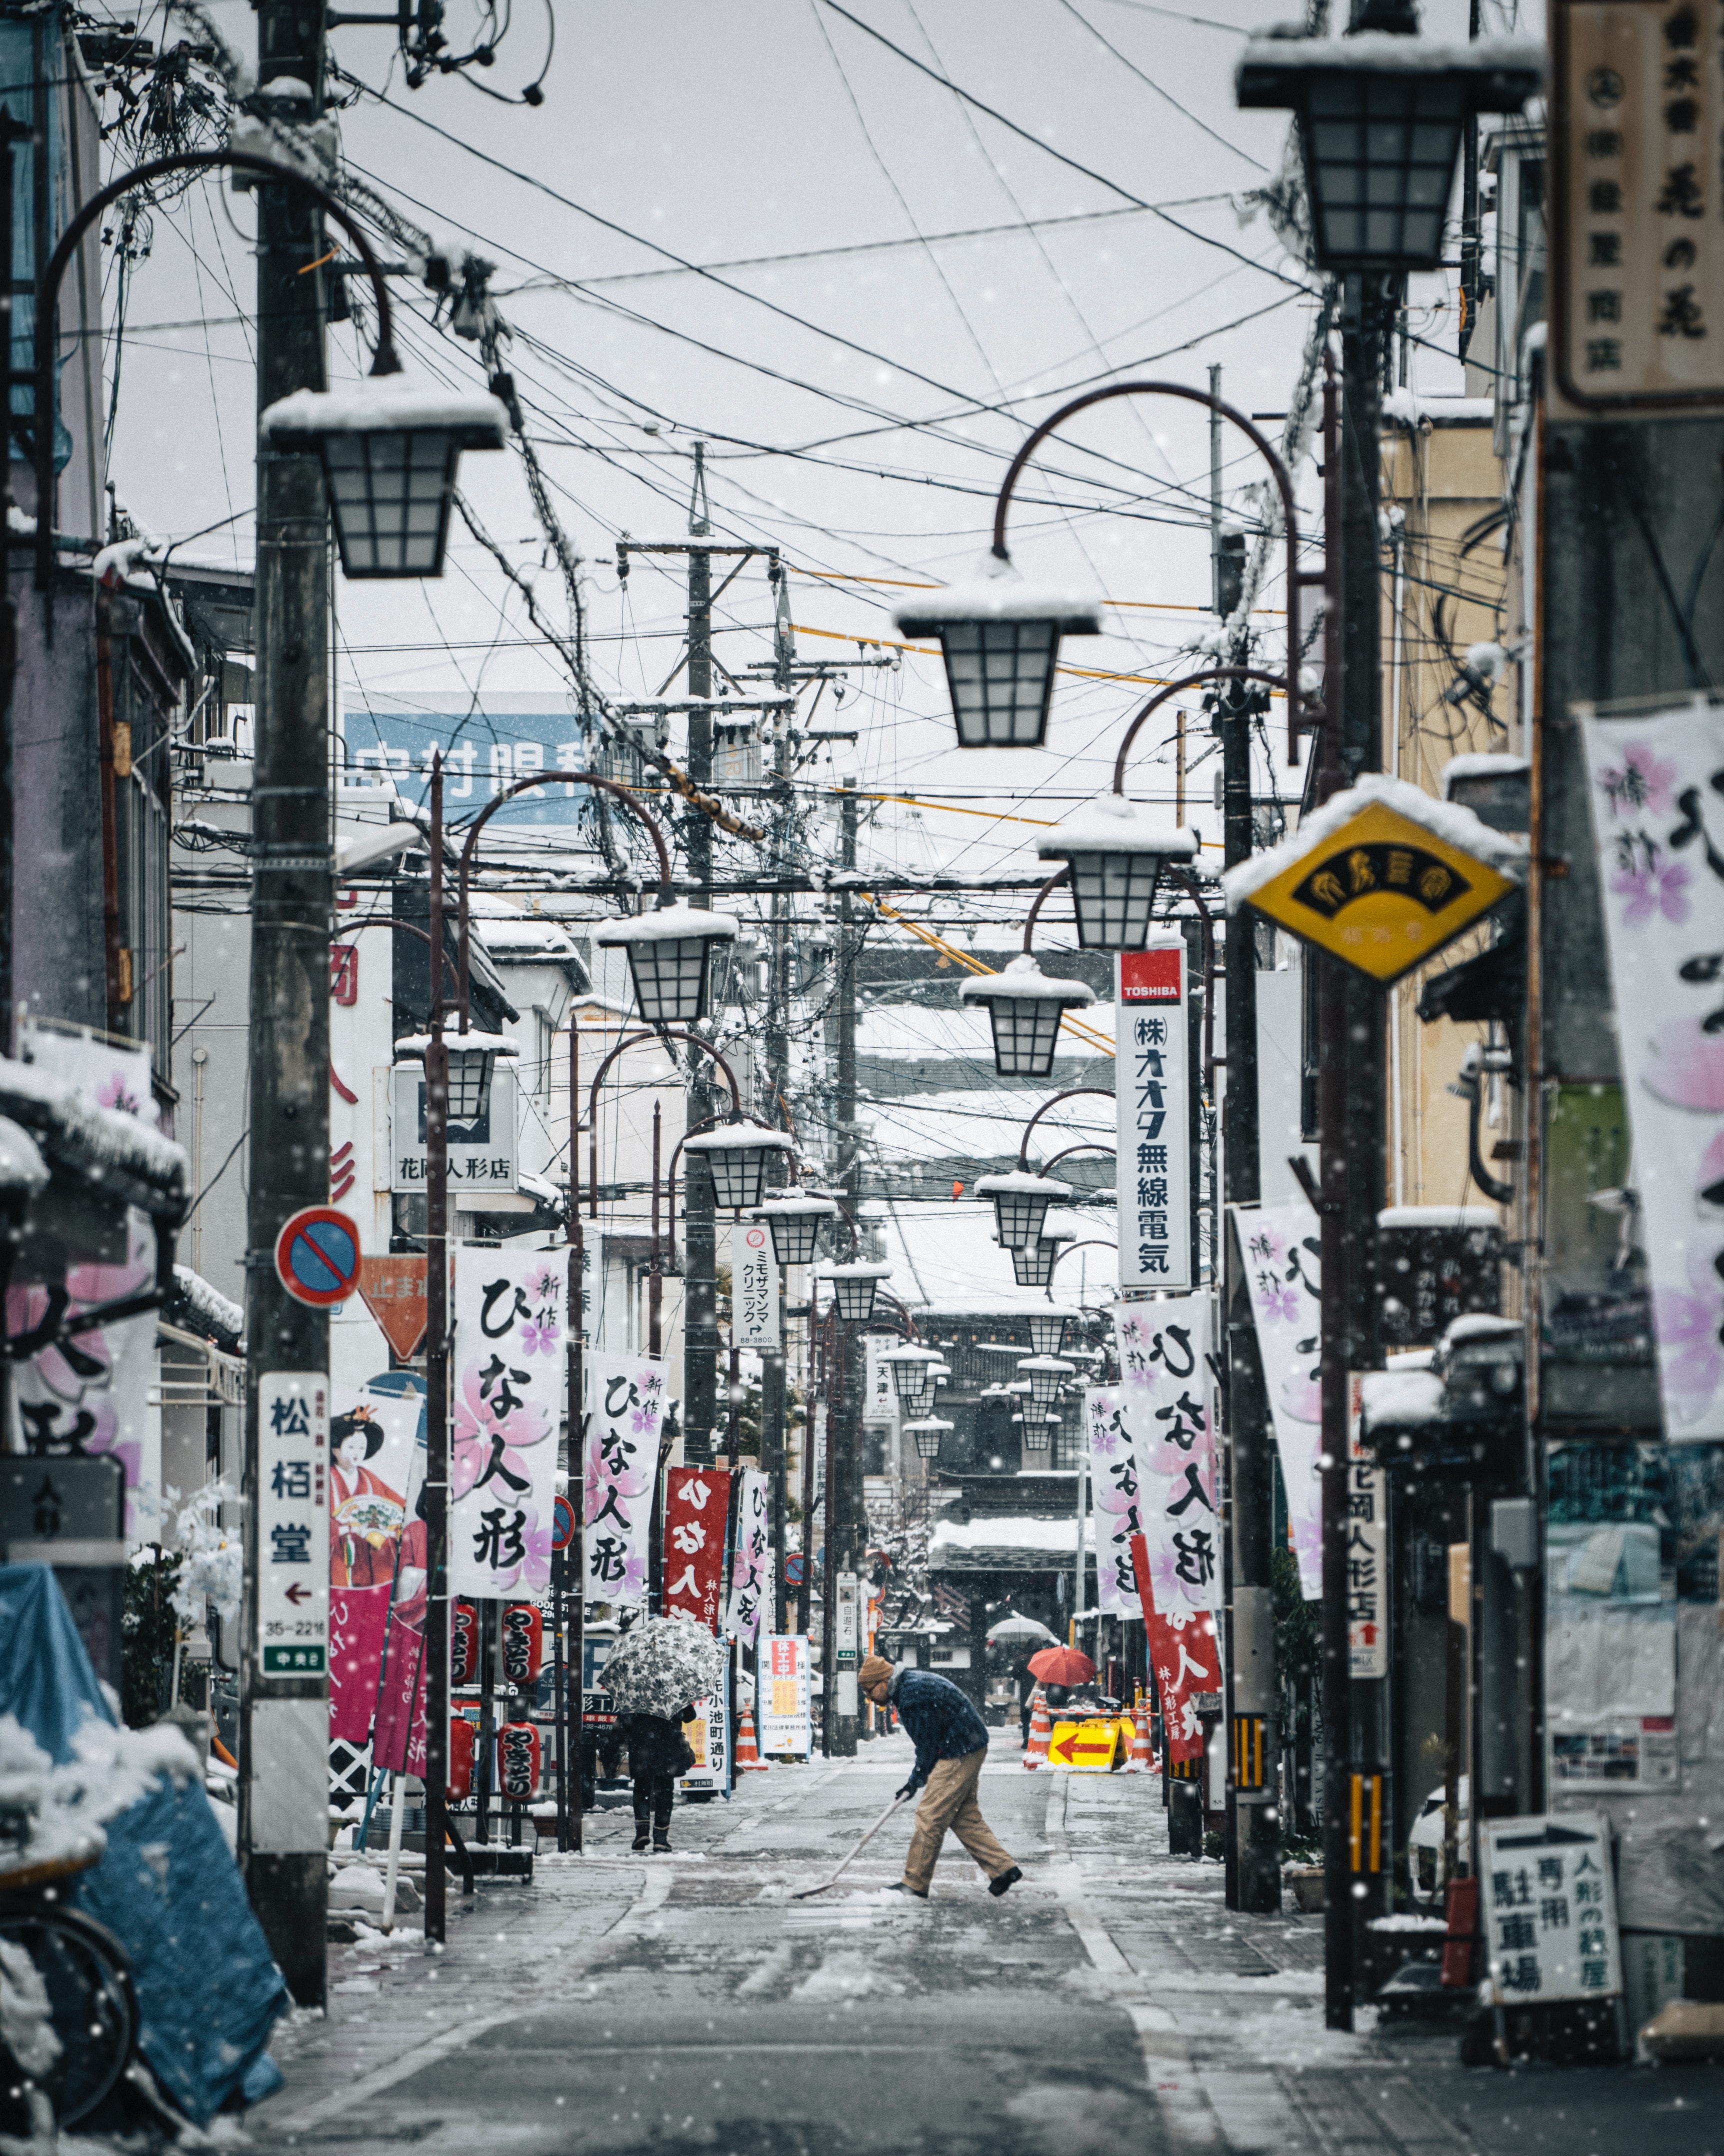 Man shovels snowy street, which is lined by lanterns and banners with Japanese characters